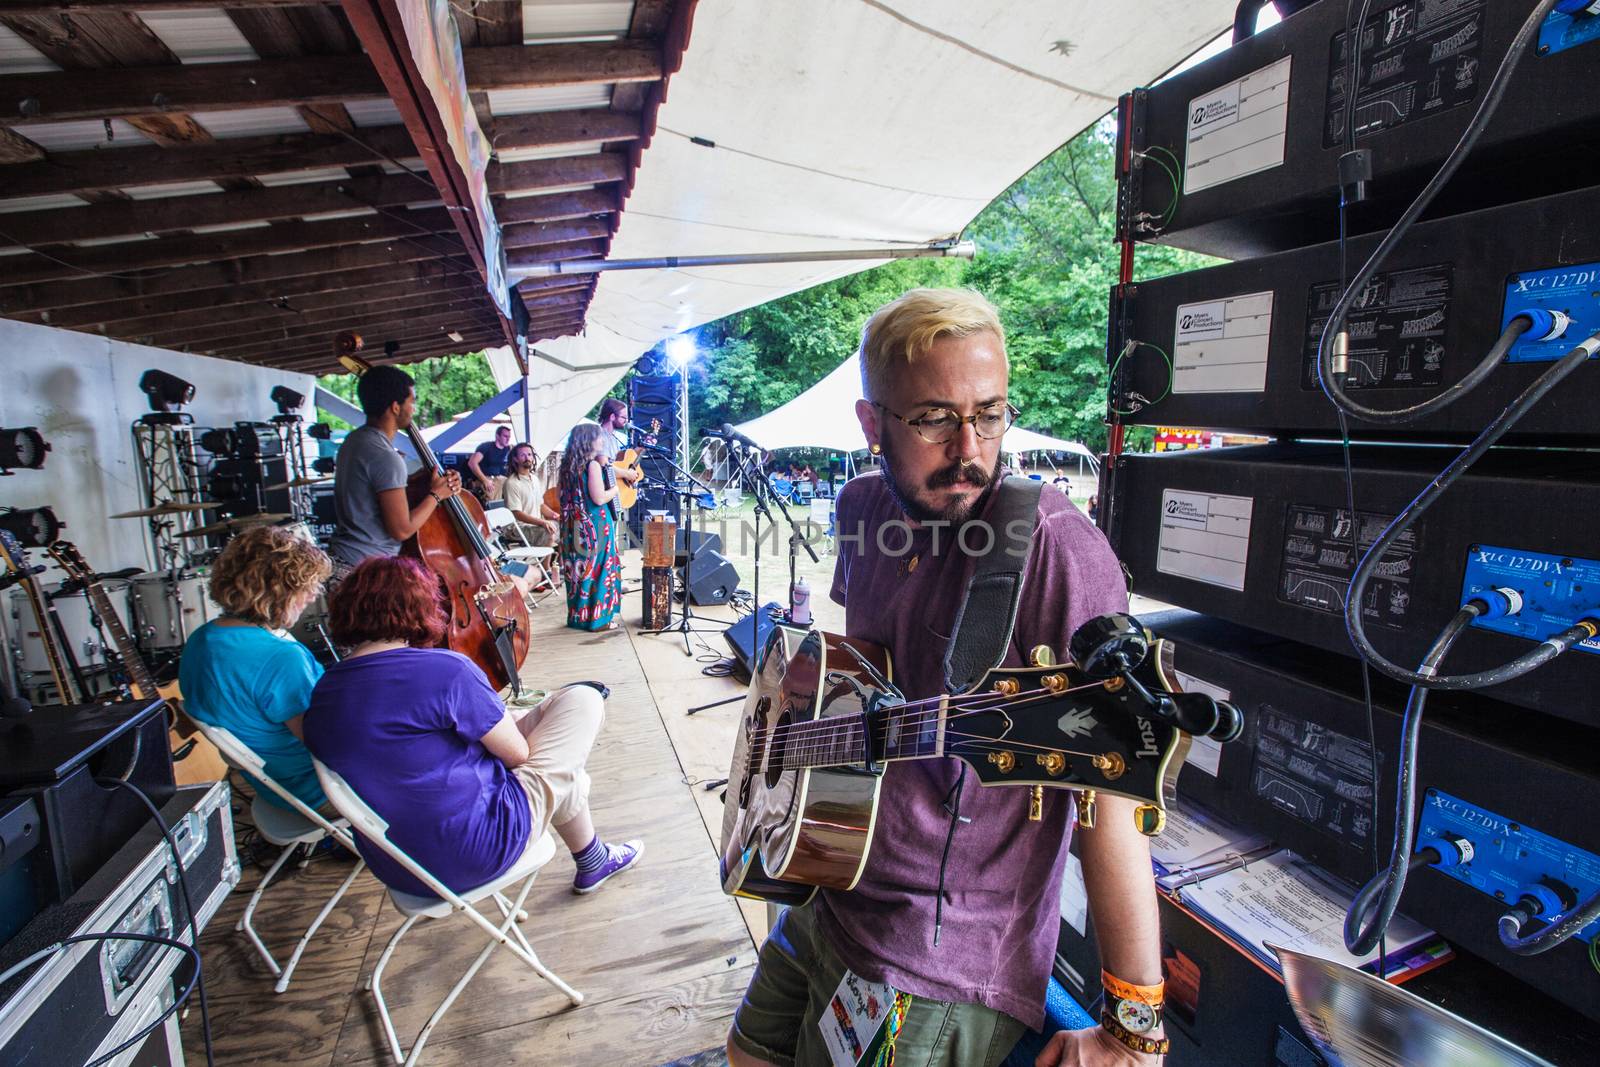 HOT SPRINGS, NC - JULY 9: Guitarist and song writer Matt Morris leans on an amplifier while waiting to perform at the Wild Goose Festival on July 9, 2016 in Hot Springs, NC, USA.